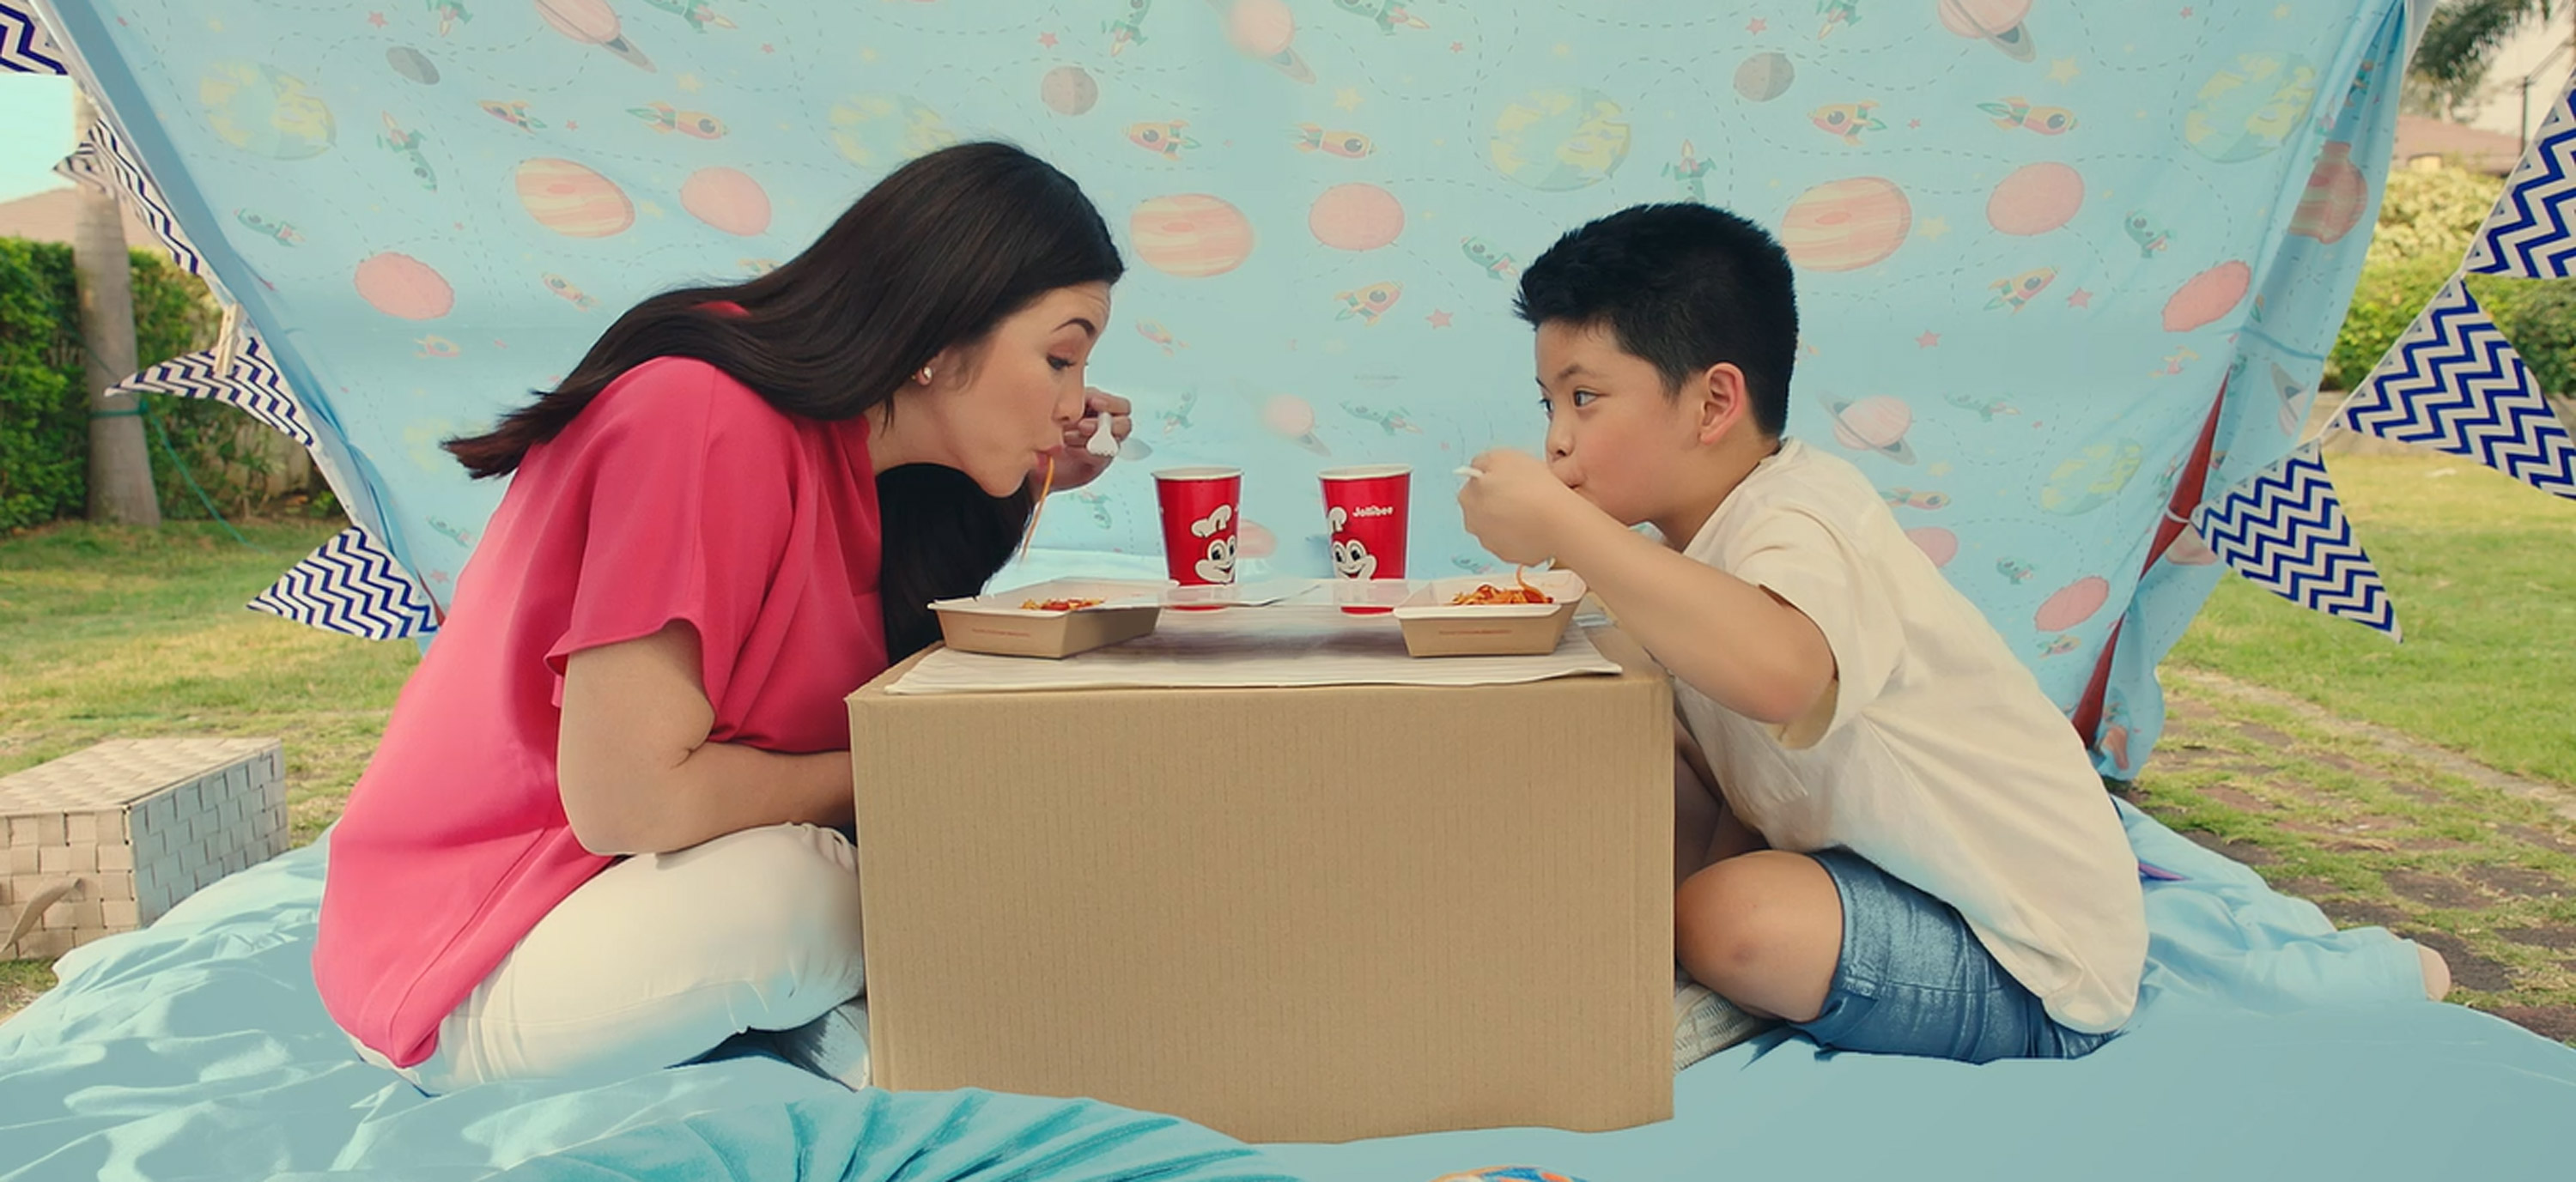 Make bonding extra special just like Regine and Nate Alcasid in this new Jolly Spaghetti Ad